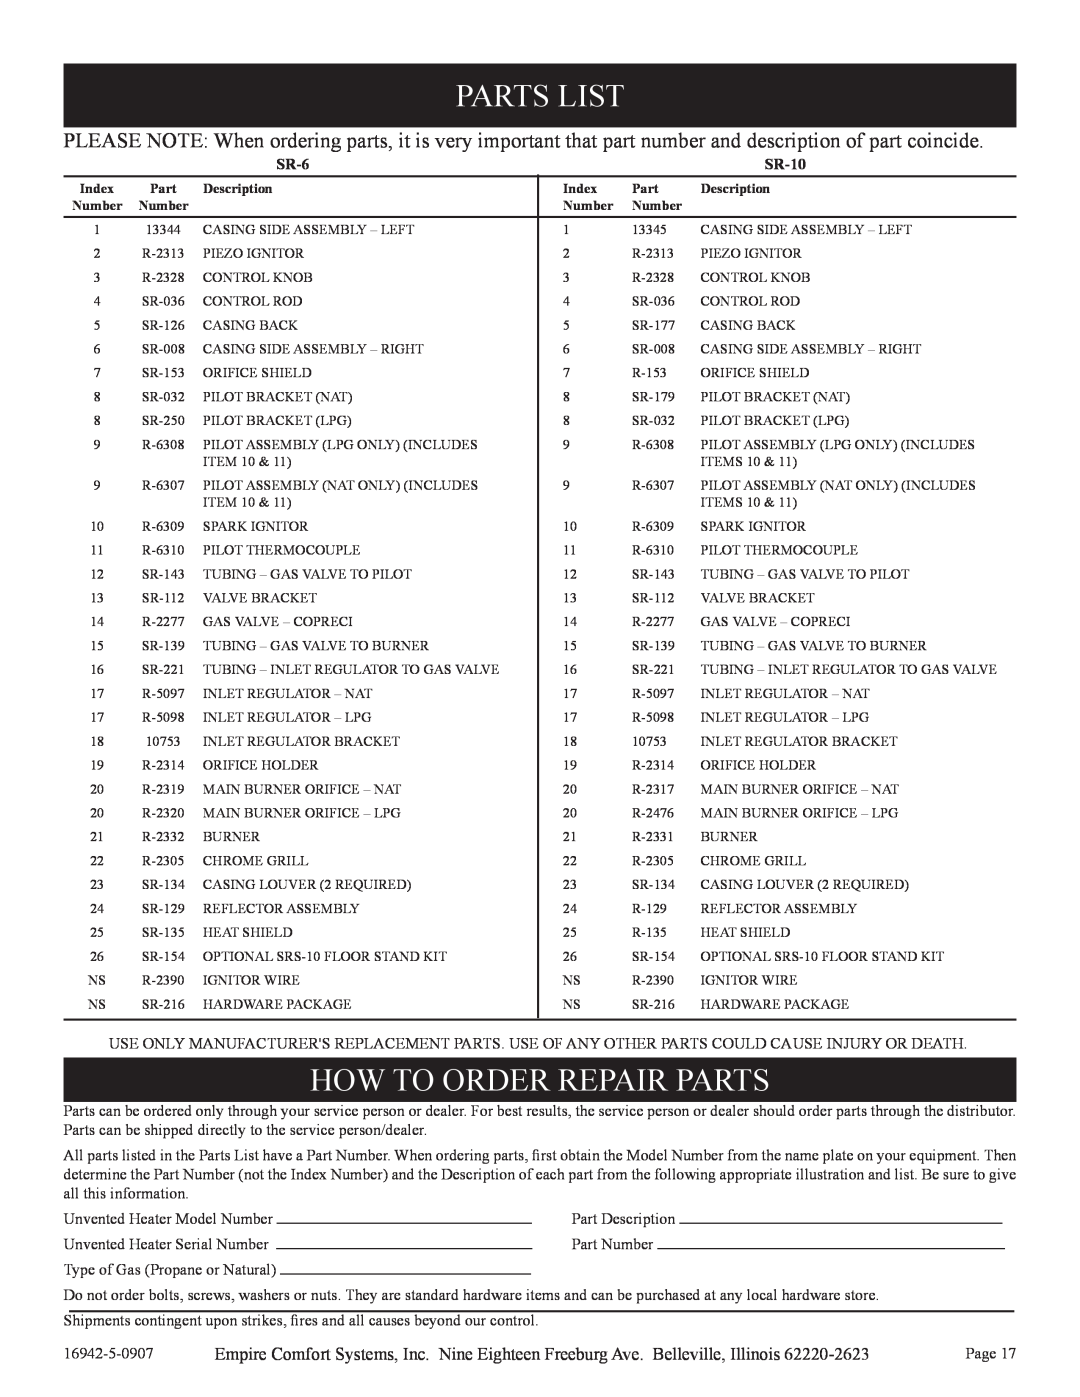 Empire Comfort Systems SR-30 installation instructions Parts List, How To Order Repair Parts, SR-6, SR-10 